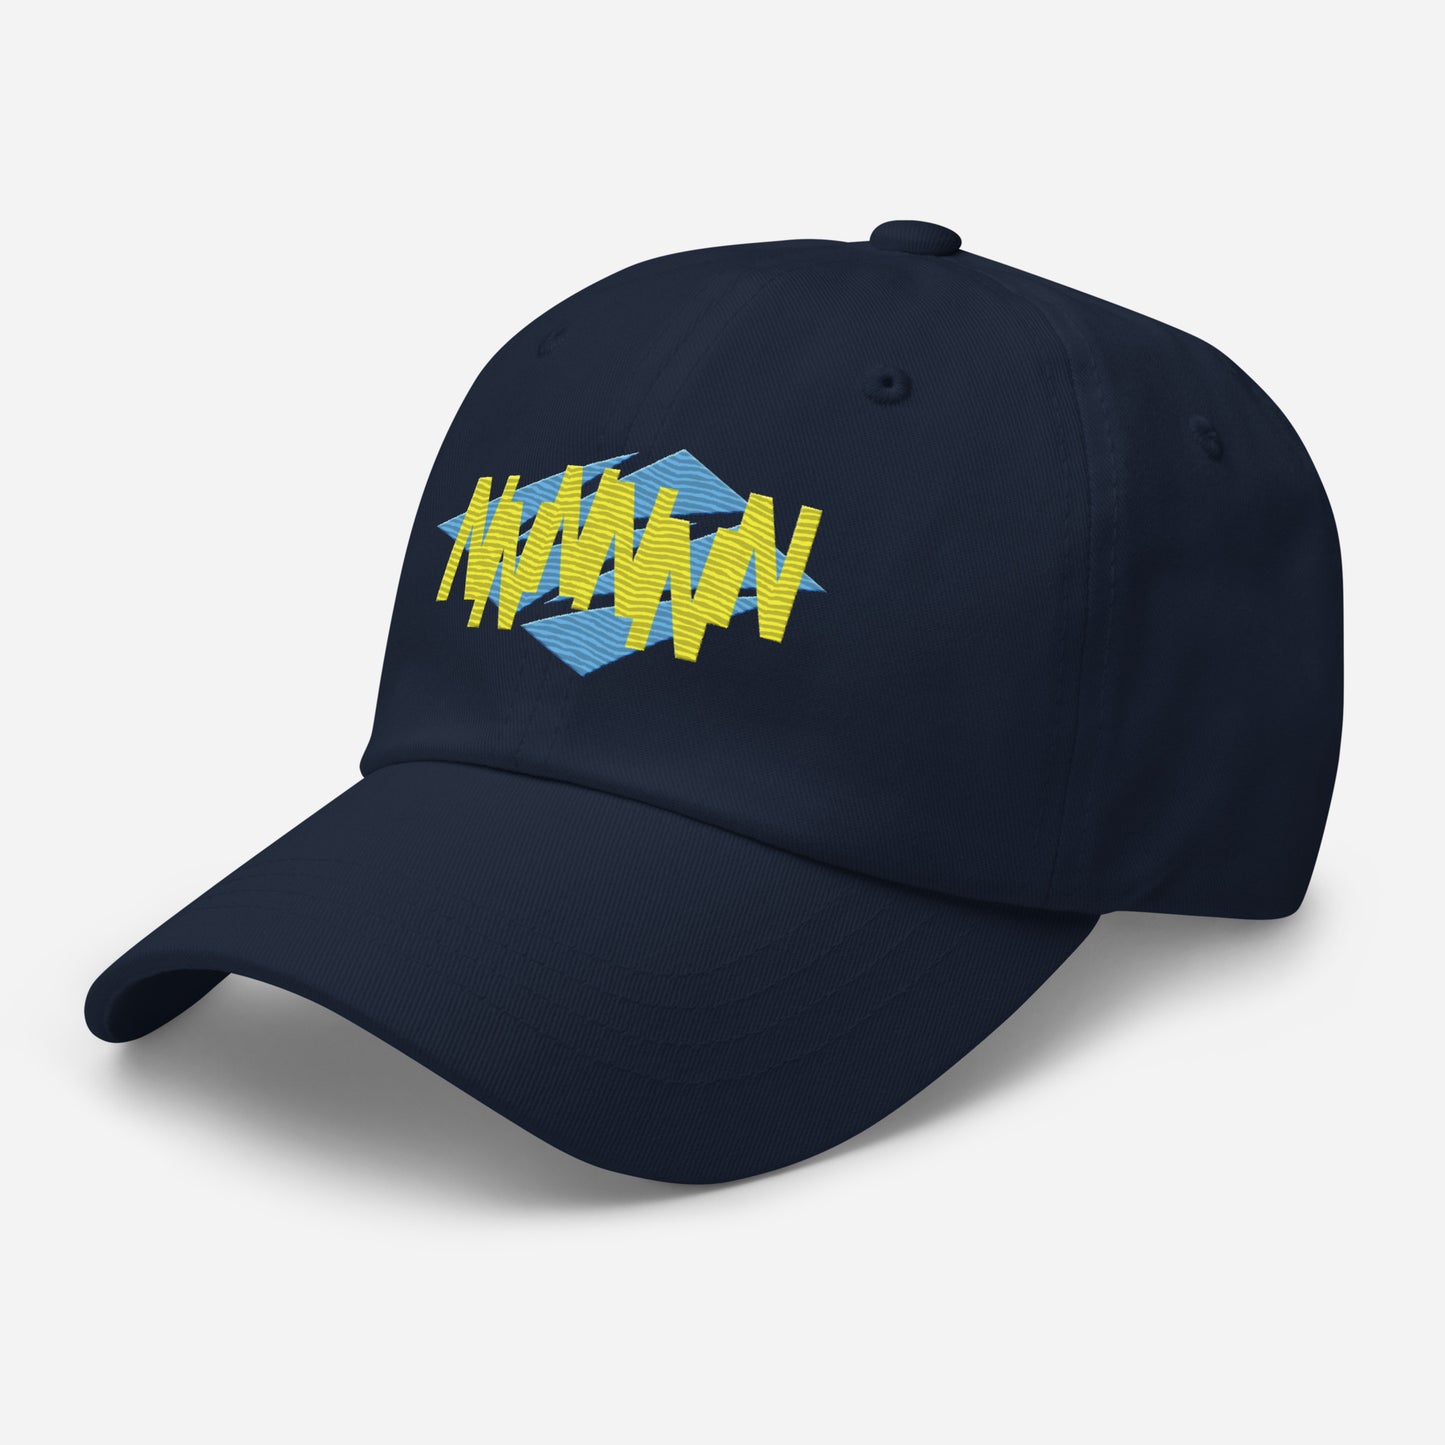 N Angles Dad hat